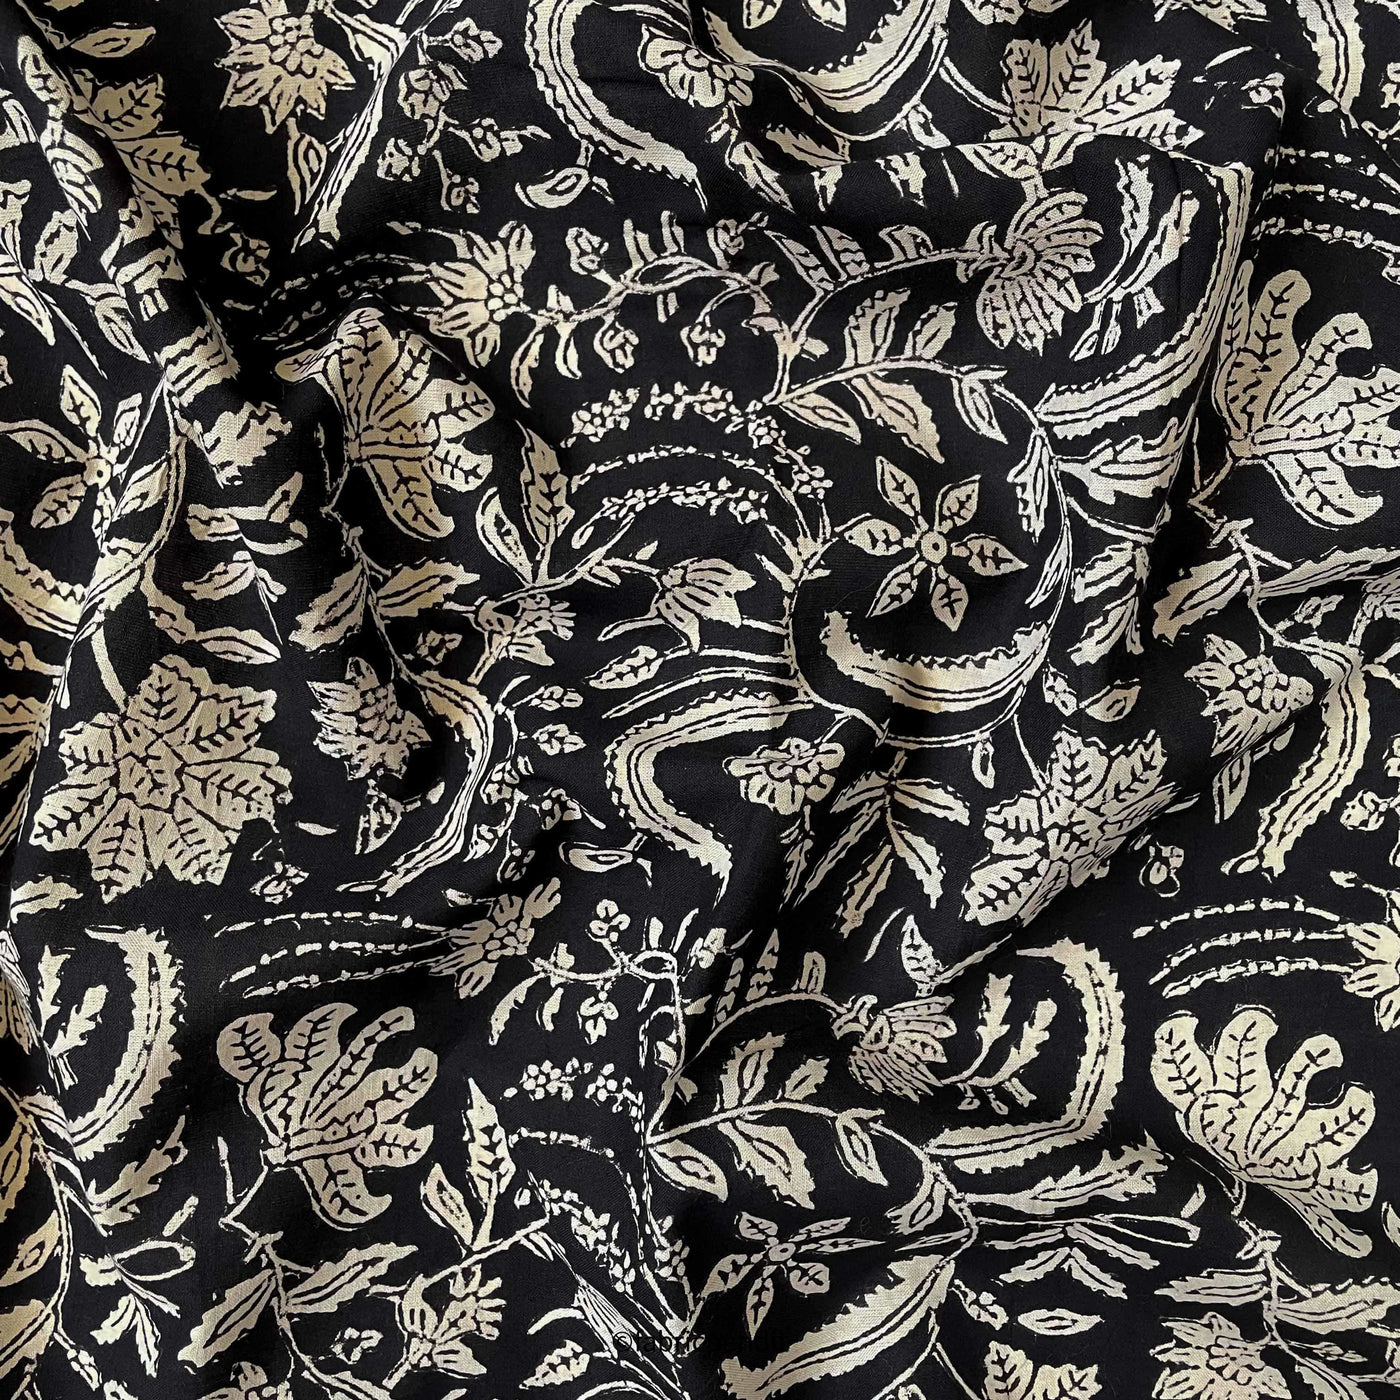 Hand Block Printed Cotton Fabric Cut Piece (CUT PIECE) Black & Beige Floral Jaal Pure Ajrakh Natural Dyed Hand Block Printed Pure Cotton Fabric (Width 42 inches)